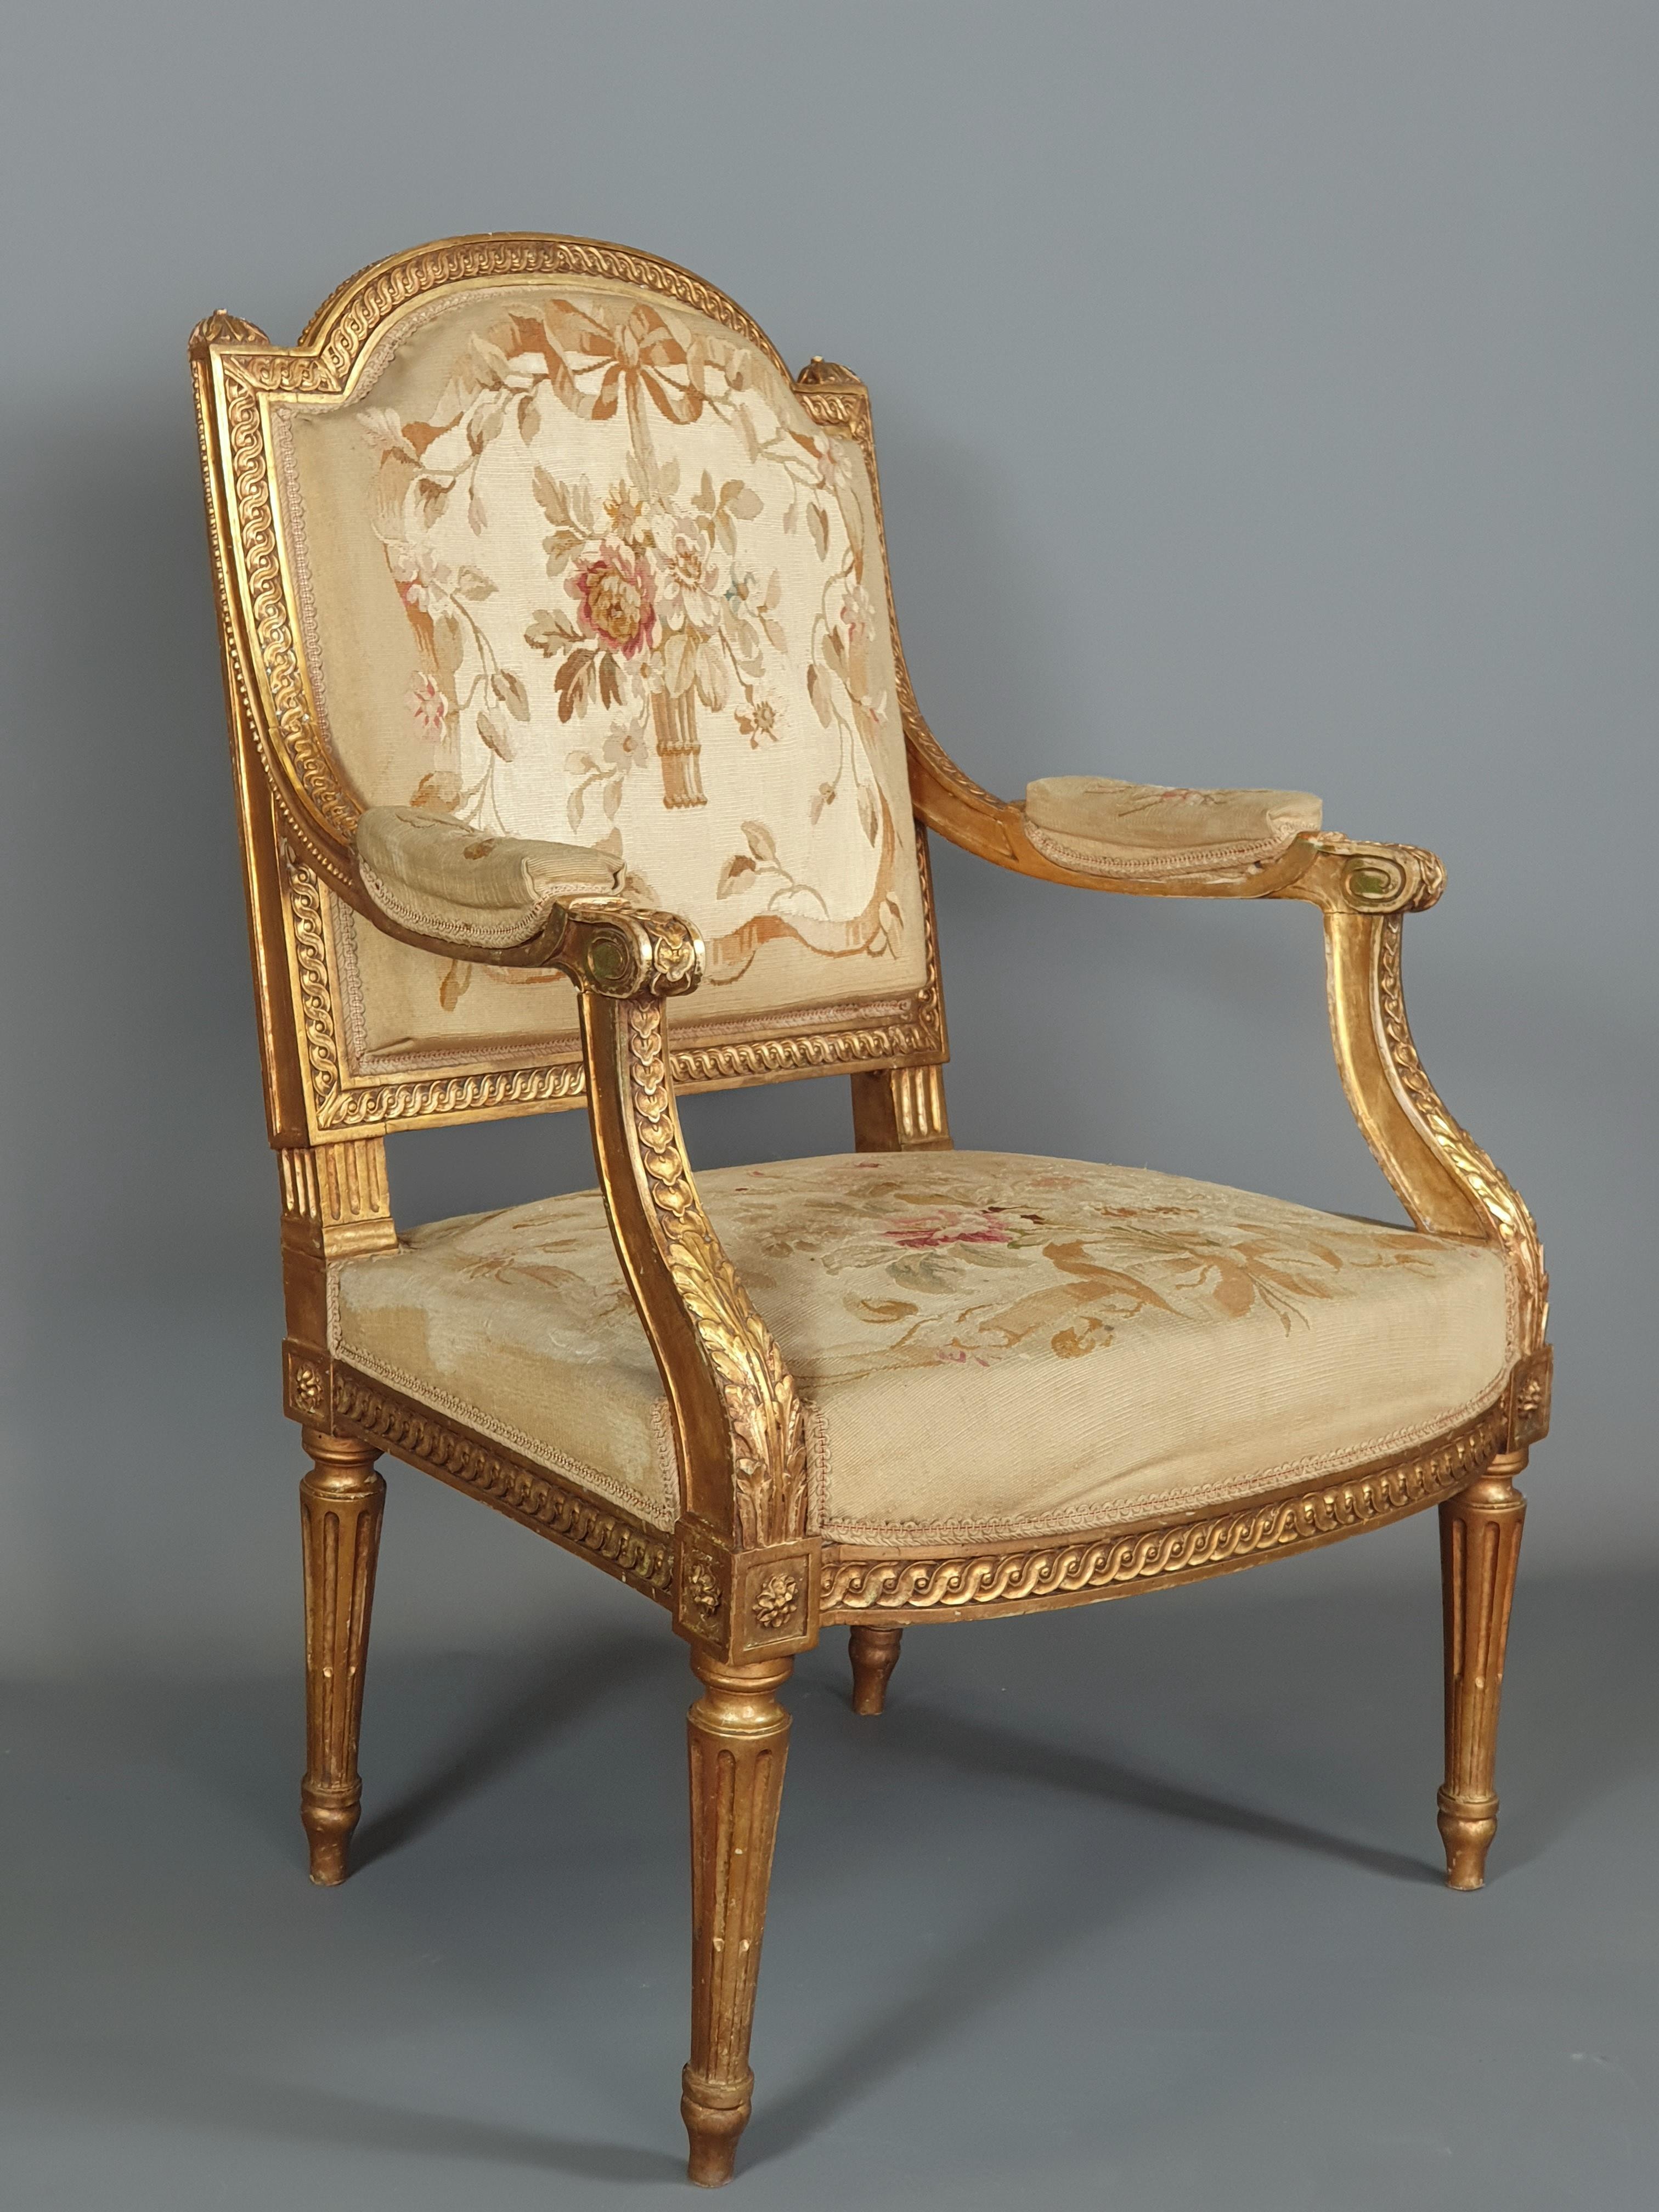 Louis XVI Living Room Furniture In Gilded Wood And Aubusson Tapestry 1